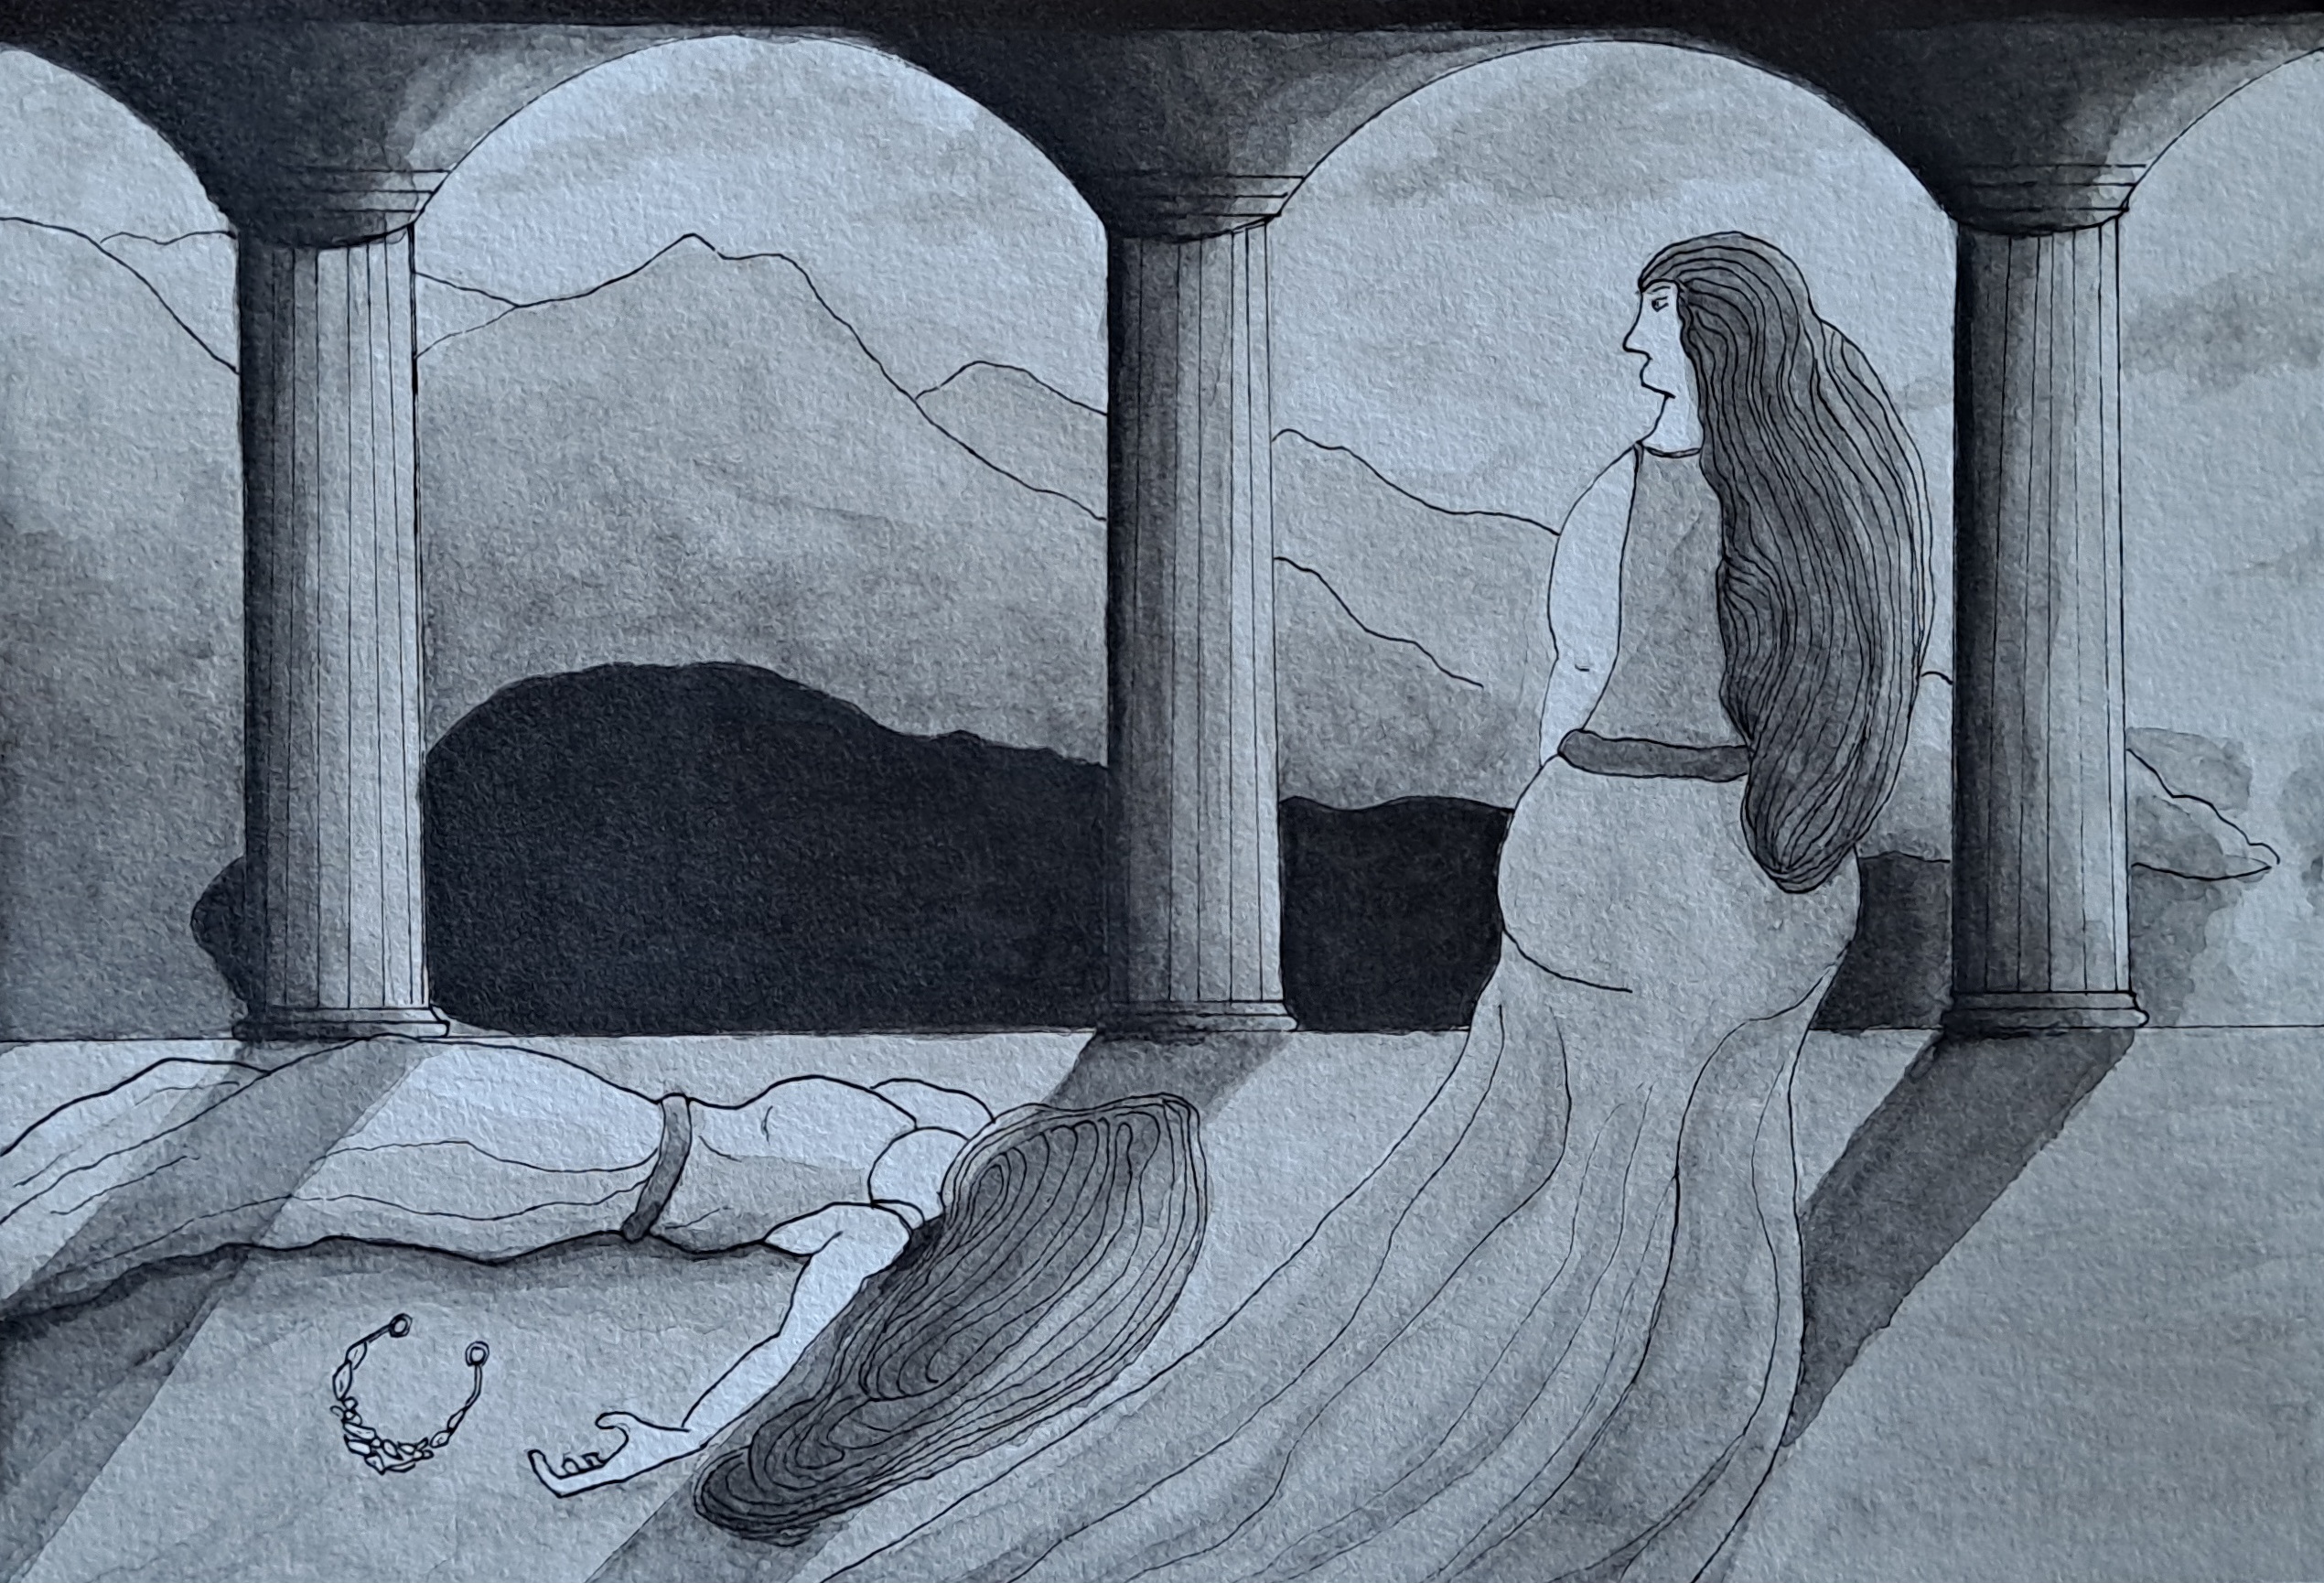 Medea and Glauce, by Exterior Selves